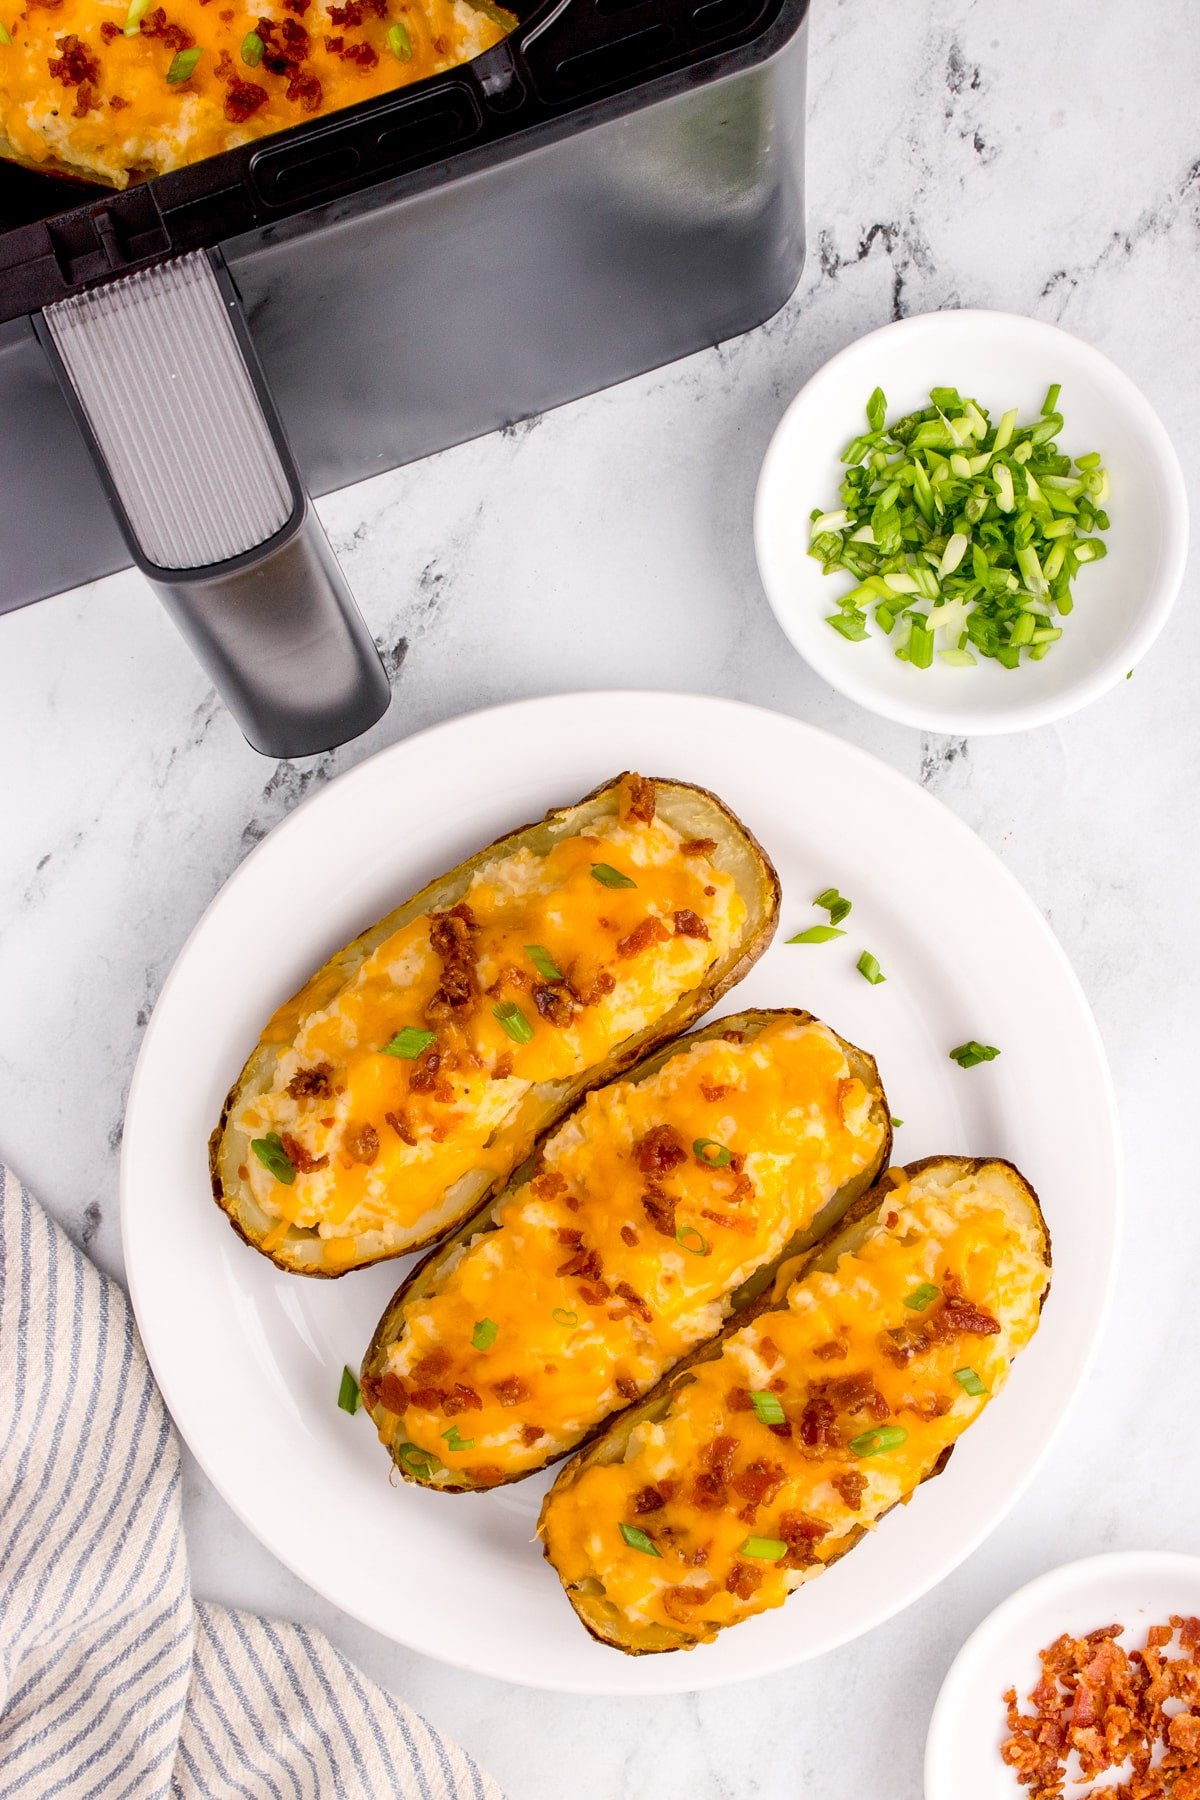 Three stuffed potatoes on a plate, with an air fryer in the background.